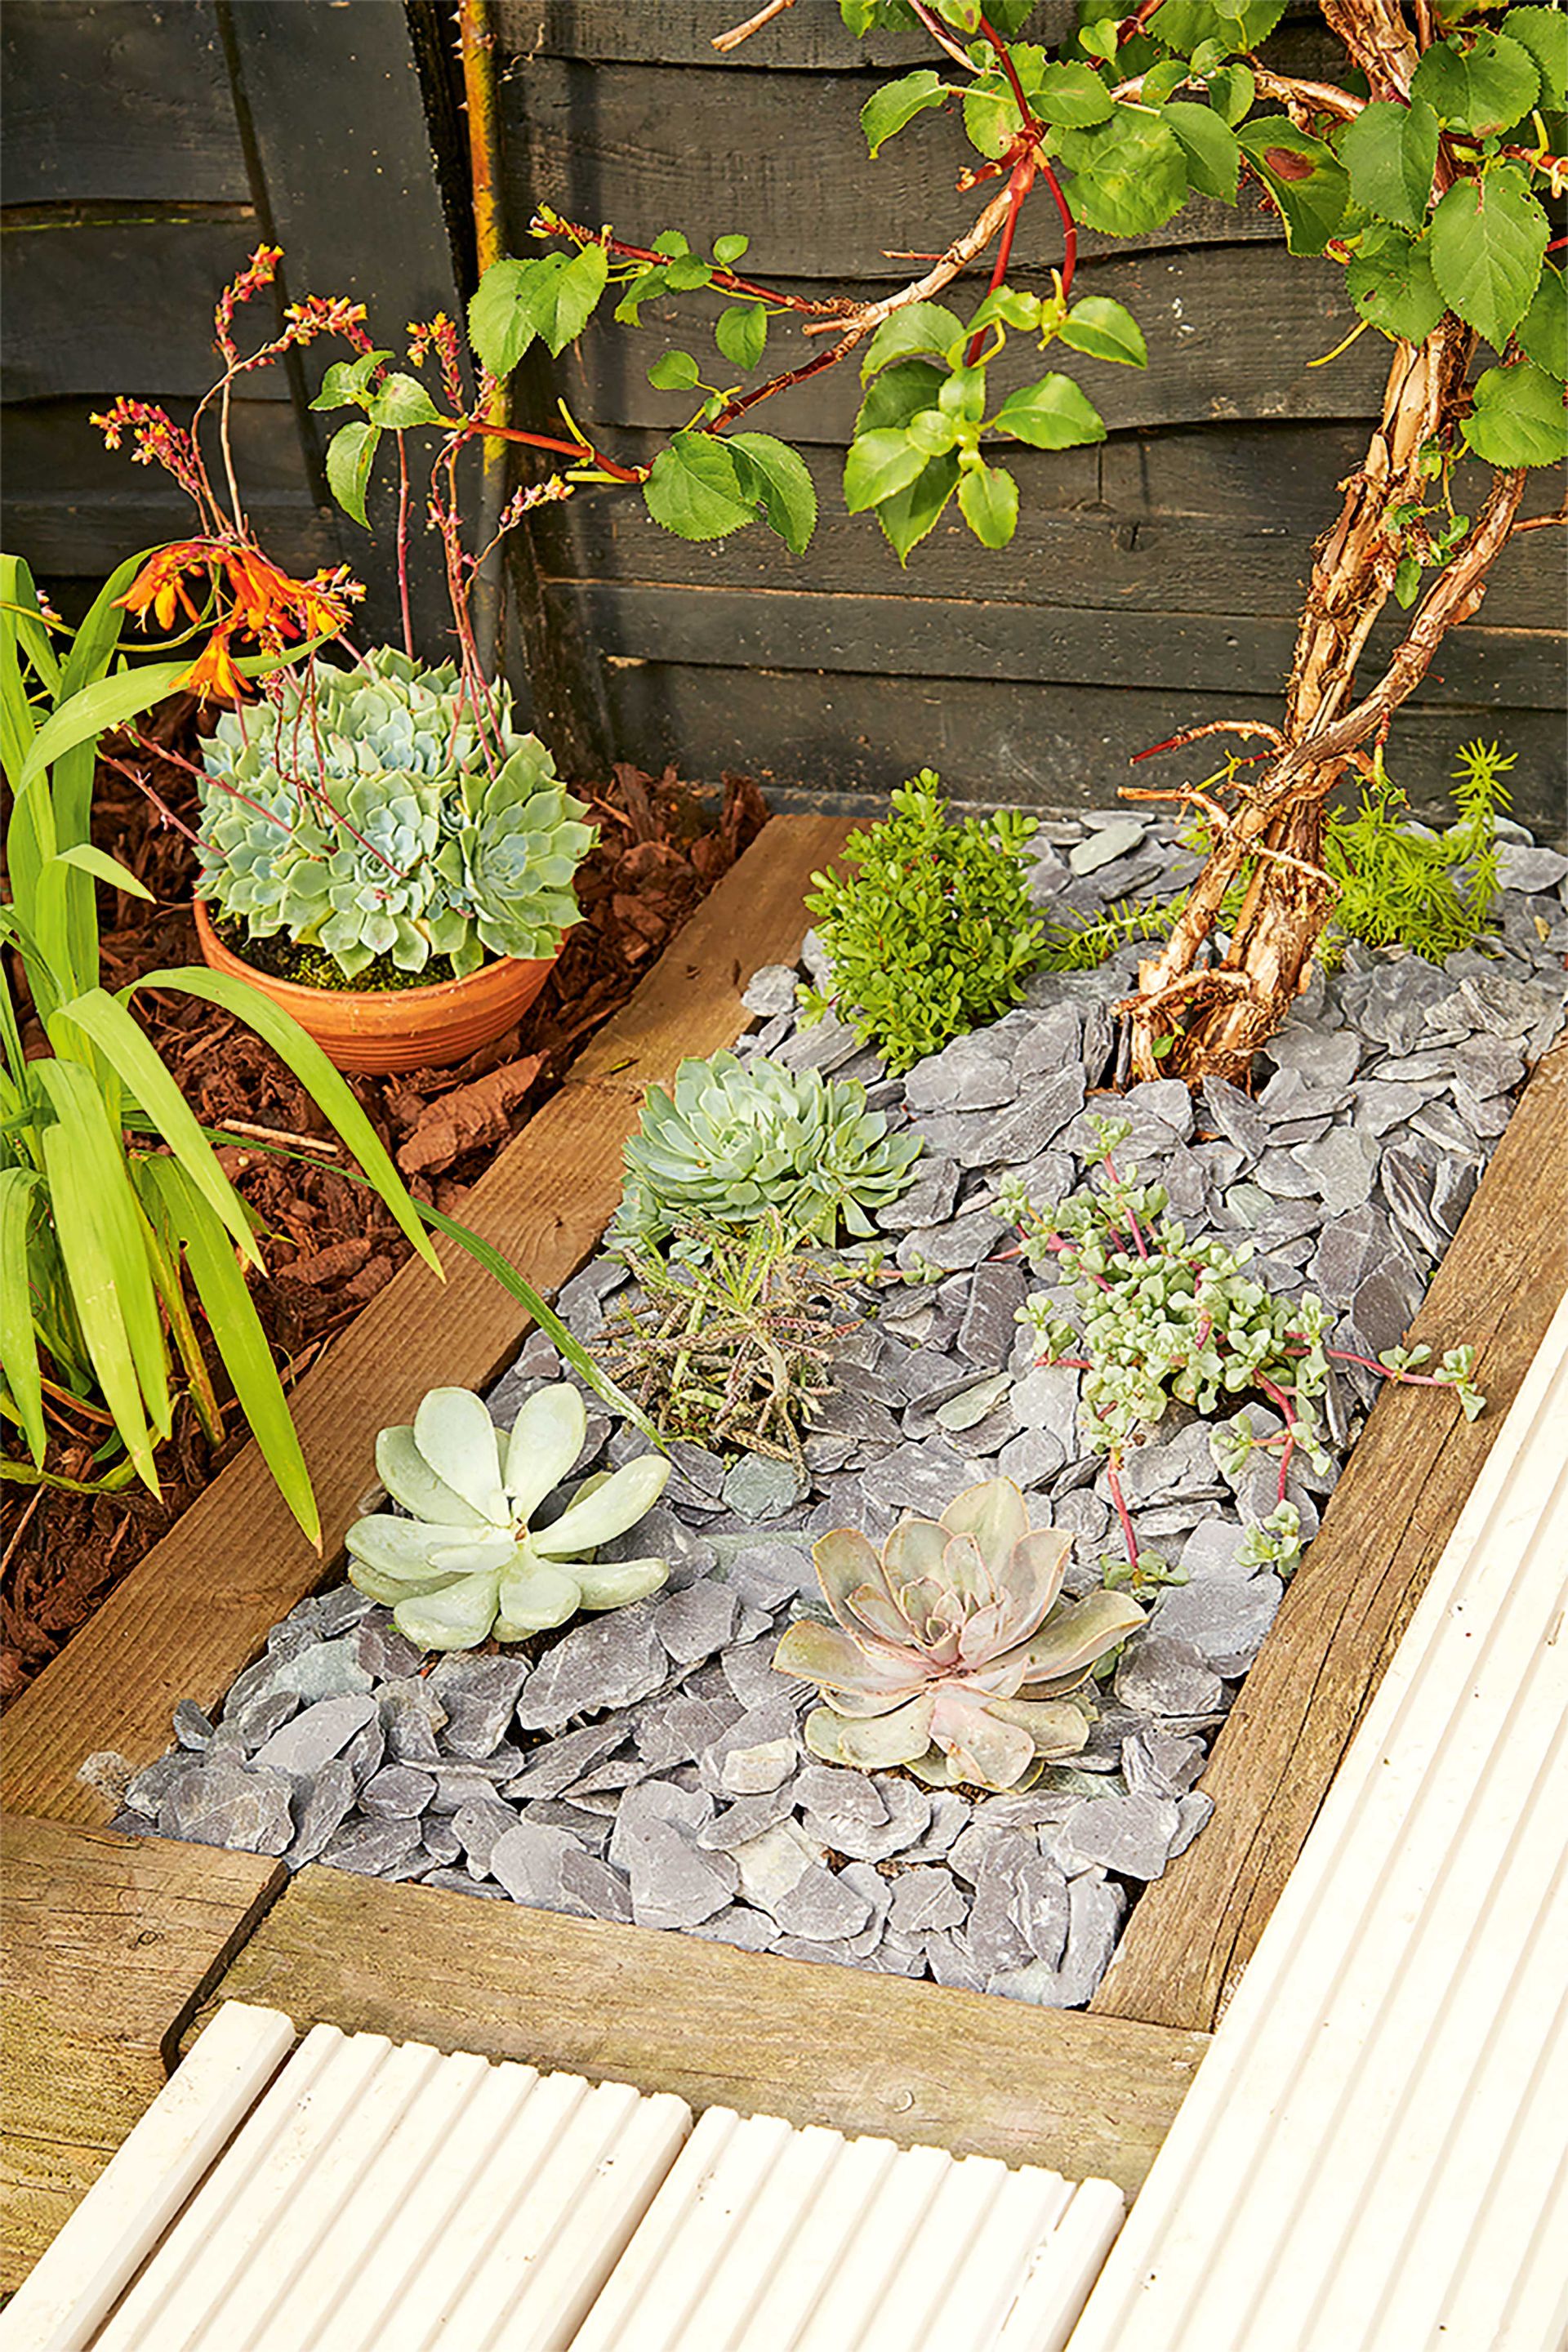 <p>                     When you're planning on laying new decks or patio, think about adding planting pockets to break up the hard landscaping. Succulents are the ideal plant for a sunny deck as once they've established it's possible to leave them for periods without watering them.                    </p>                                      <p>                     As they're quite low growing, and not easily spotted it's a good idea to grow them around the edges of your decked patio area to prevent them being trampled over. They don't need deep soil to grow, so just enough to cover their small root system, plus a bit more just to be on the safe side. Cover the soil with a layer of aggregate to give it a finished look.                   </p>                                      <p>                     An even easier way to incorporate succulent garden ideas into your landscaping is to go for a gravel patio. The succulents can simply be planted in slits in your weed proof membrane to grow up through your hardscaping material.                    </p>